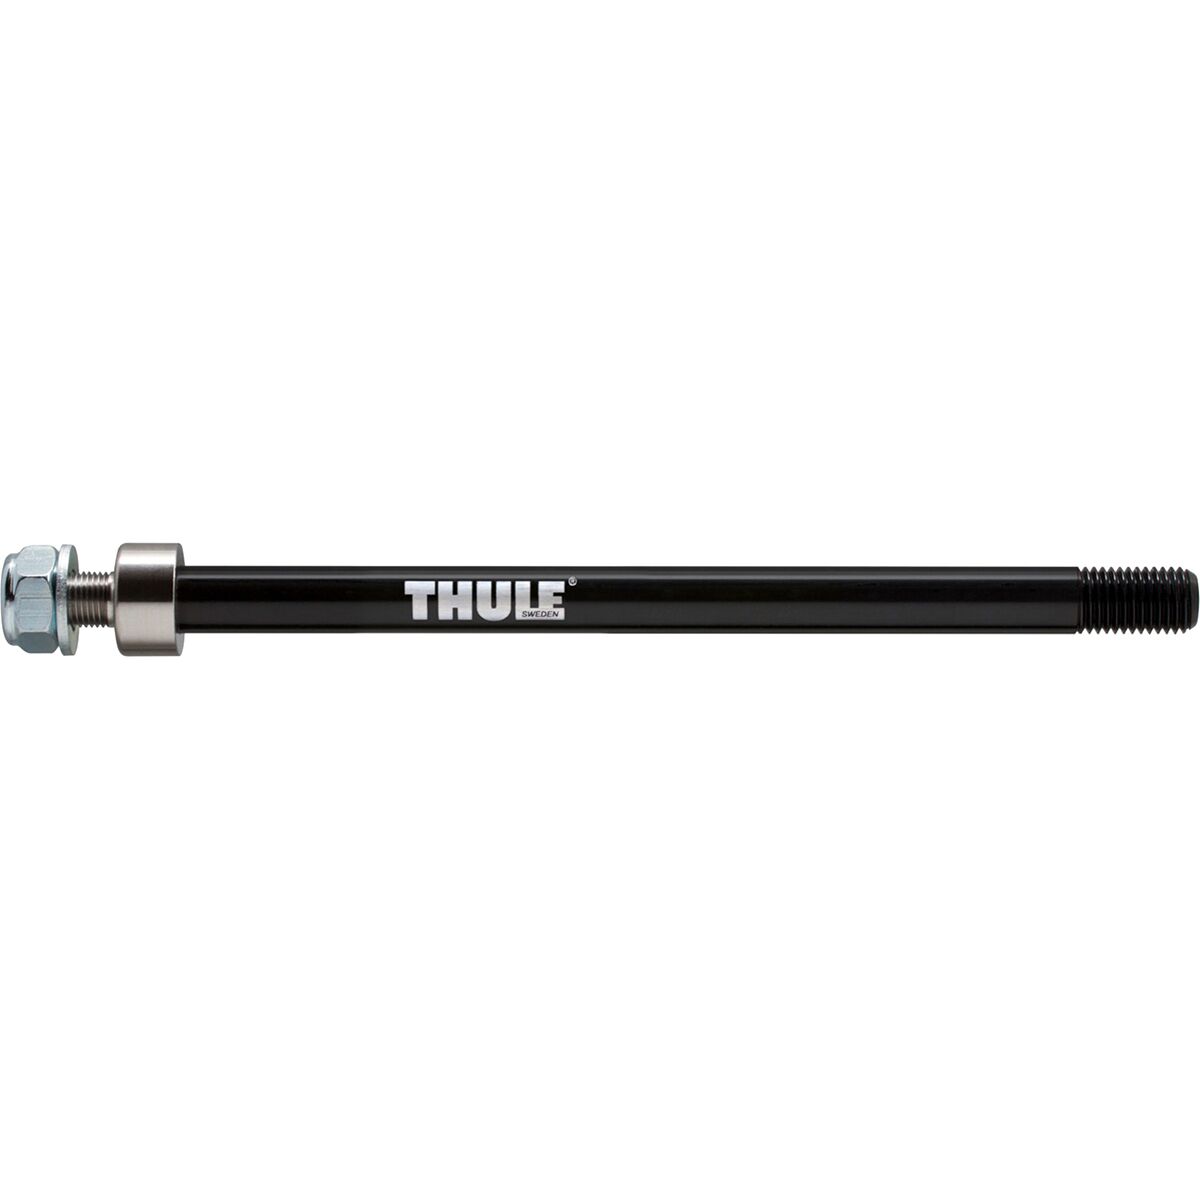 Thule Chariot 12mm Axle Adapter One Color, One Size